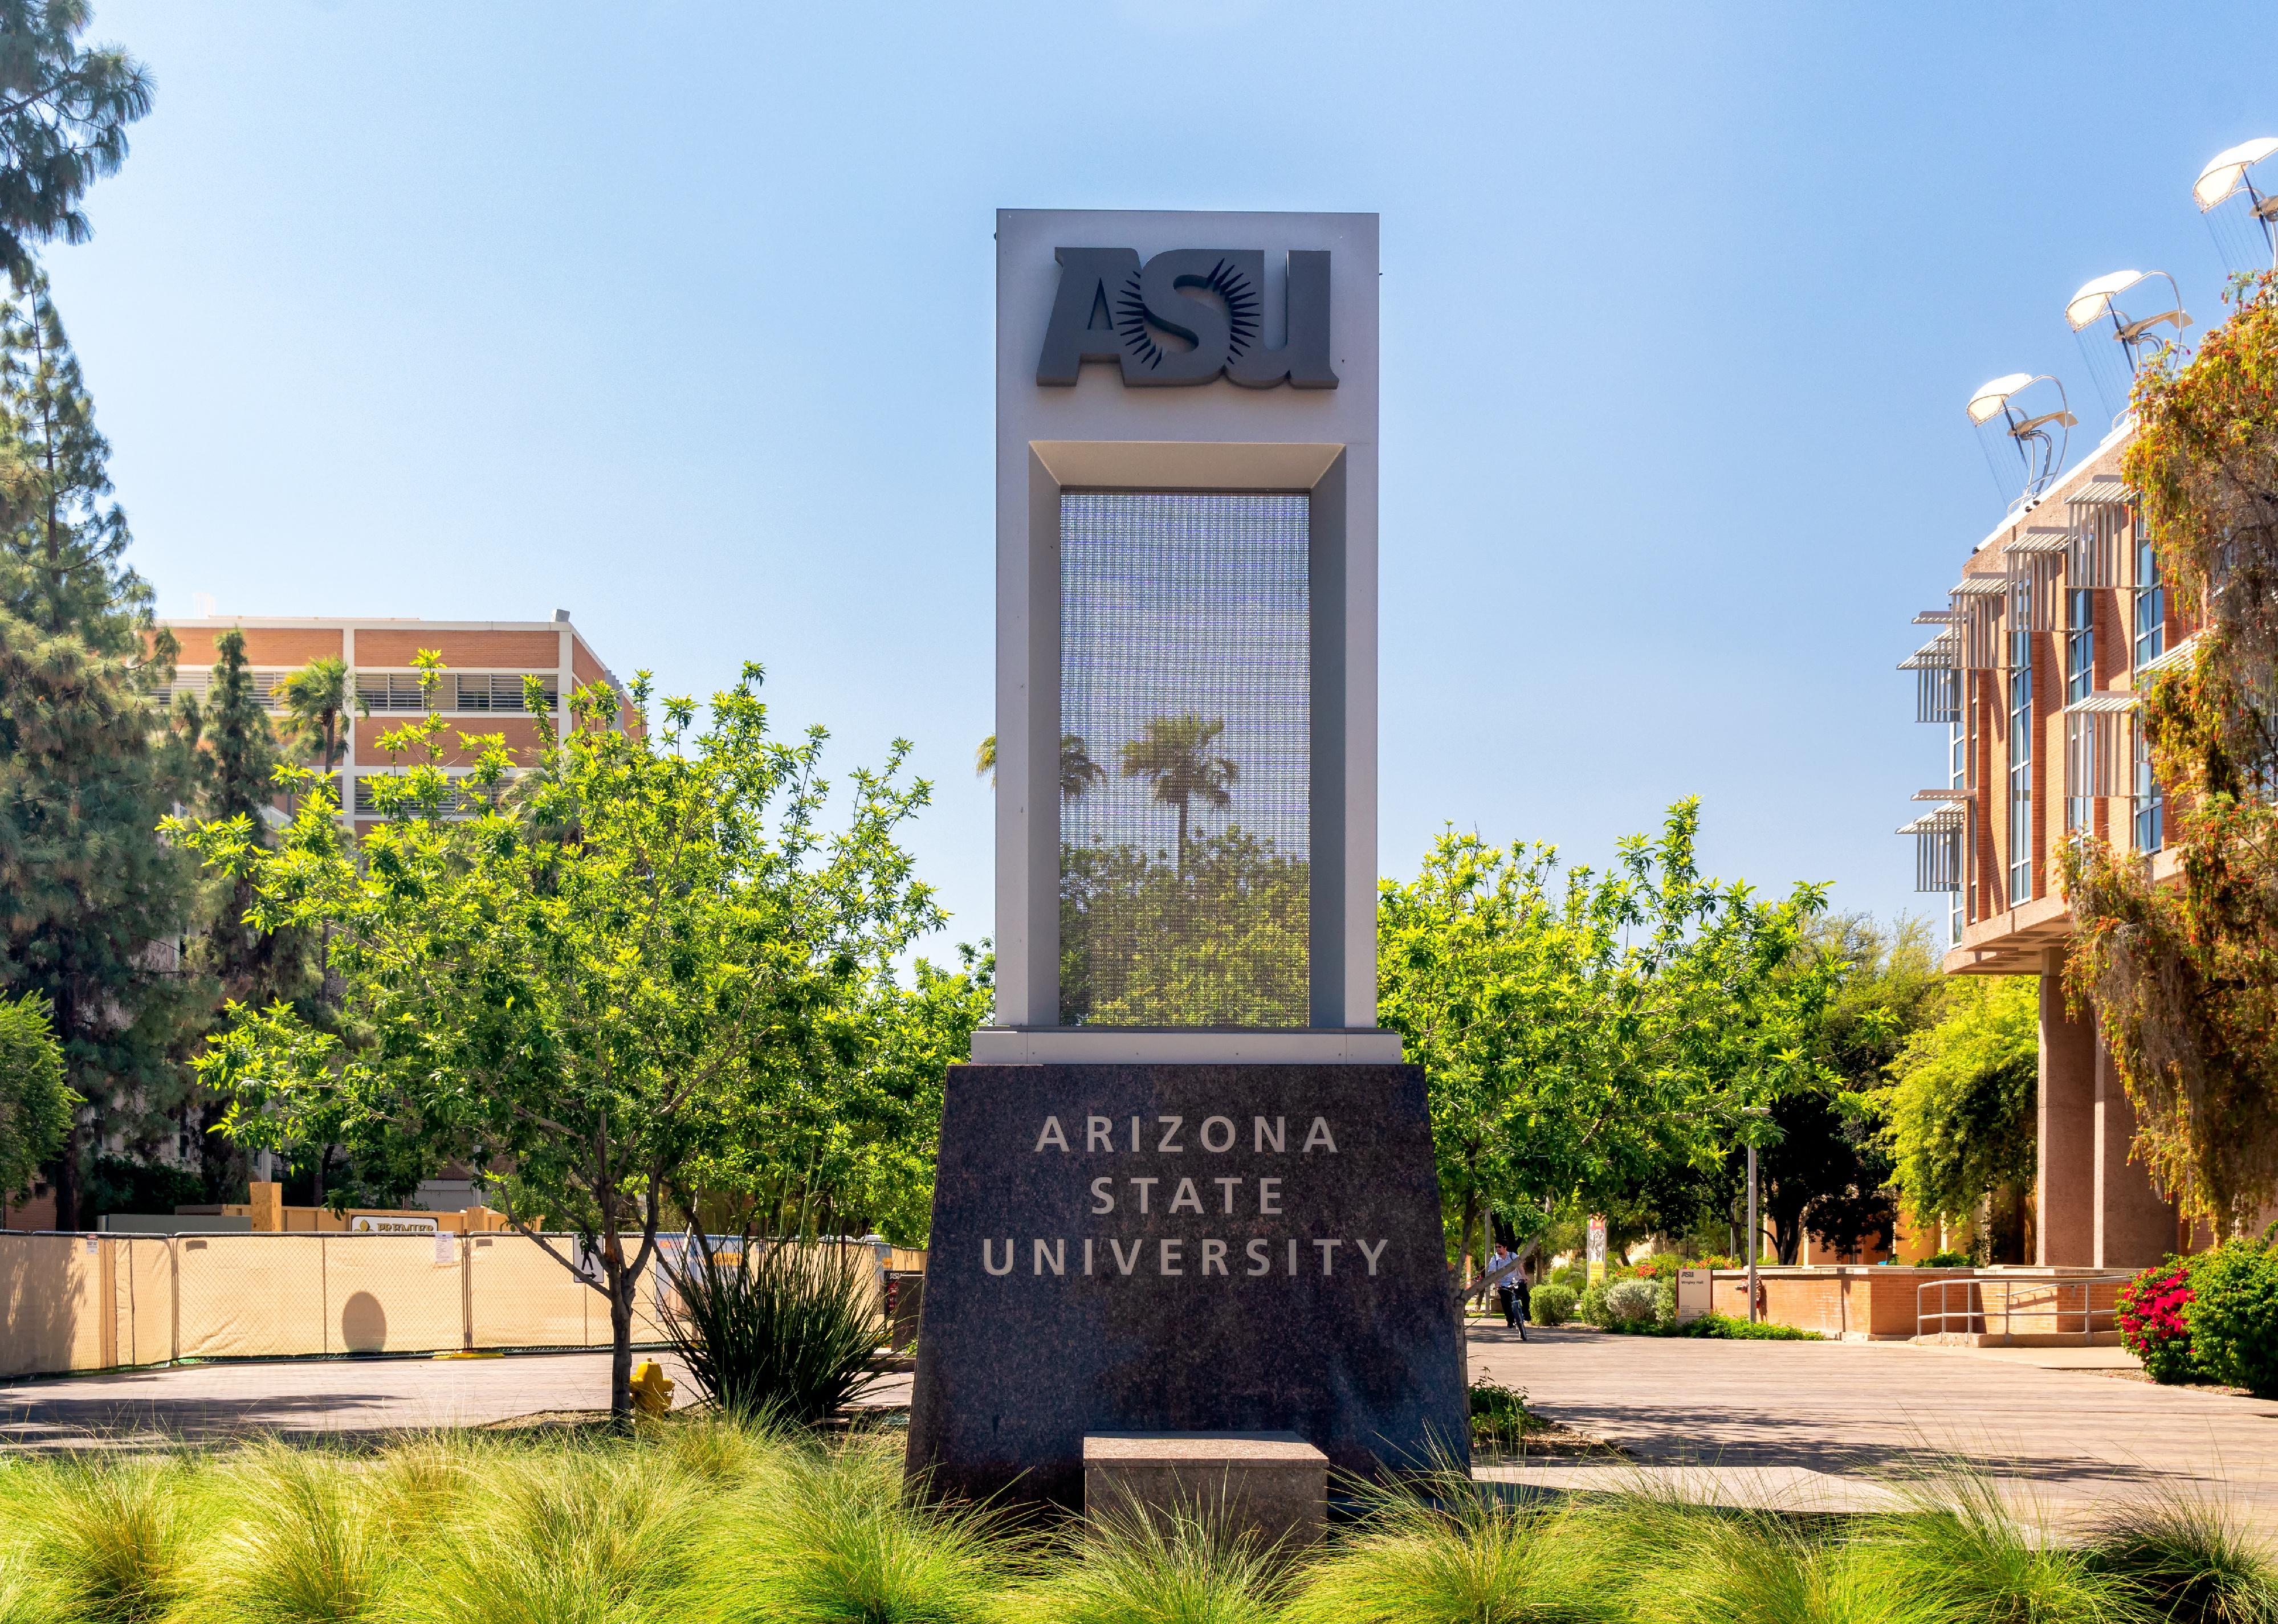 Entrance sign to the campus of Arizona State University.